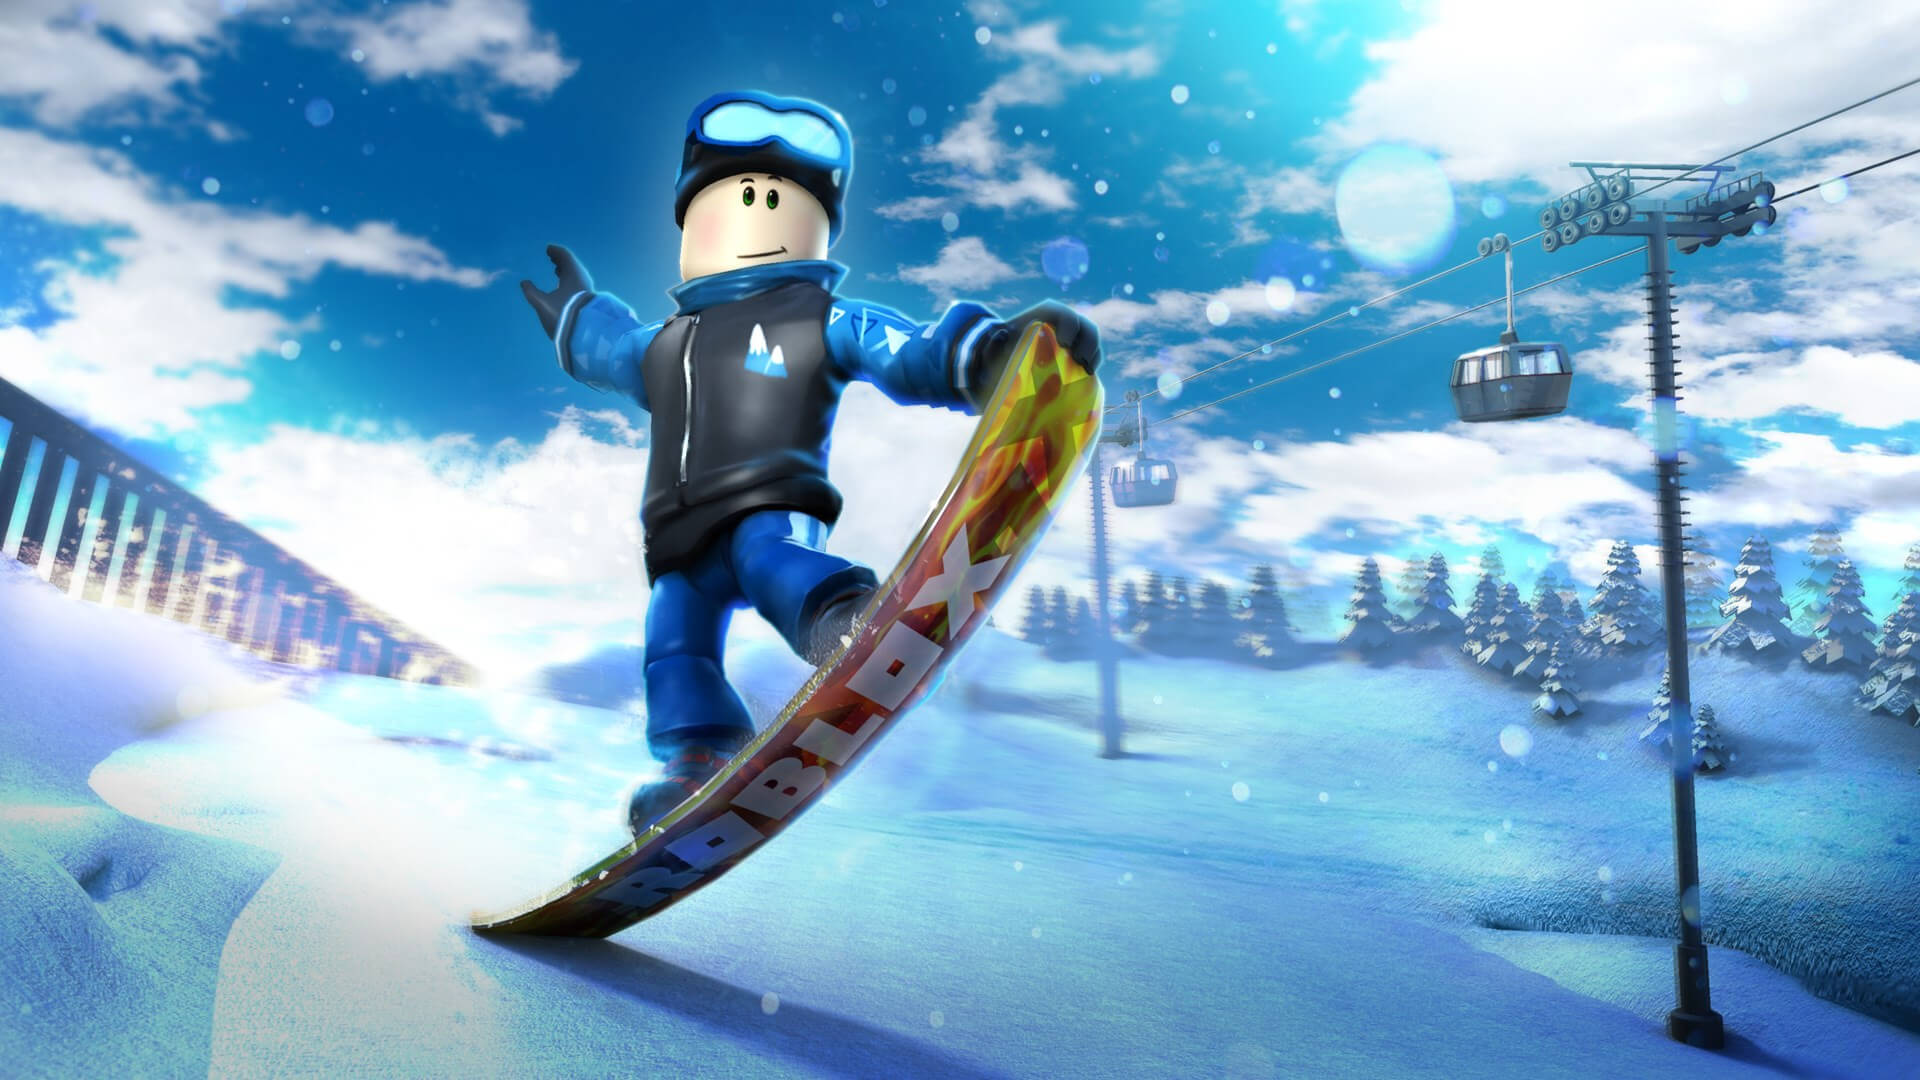 A snowboarding avatar in Roblox